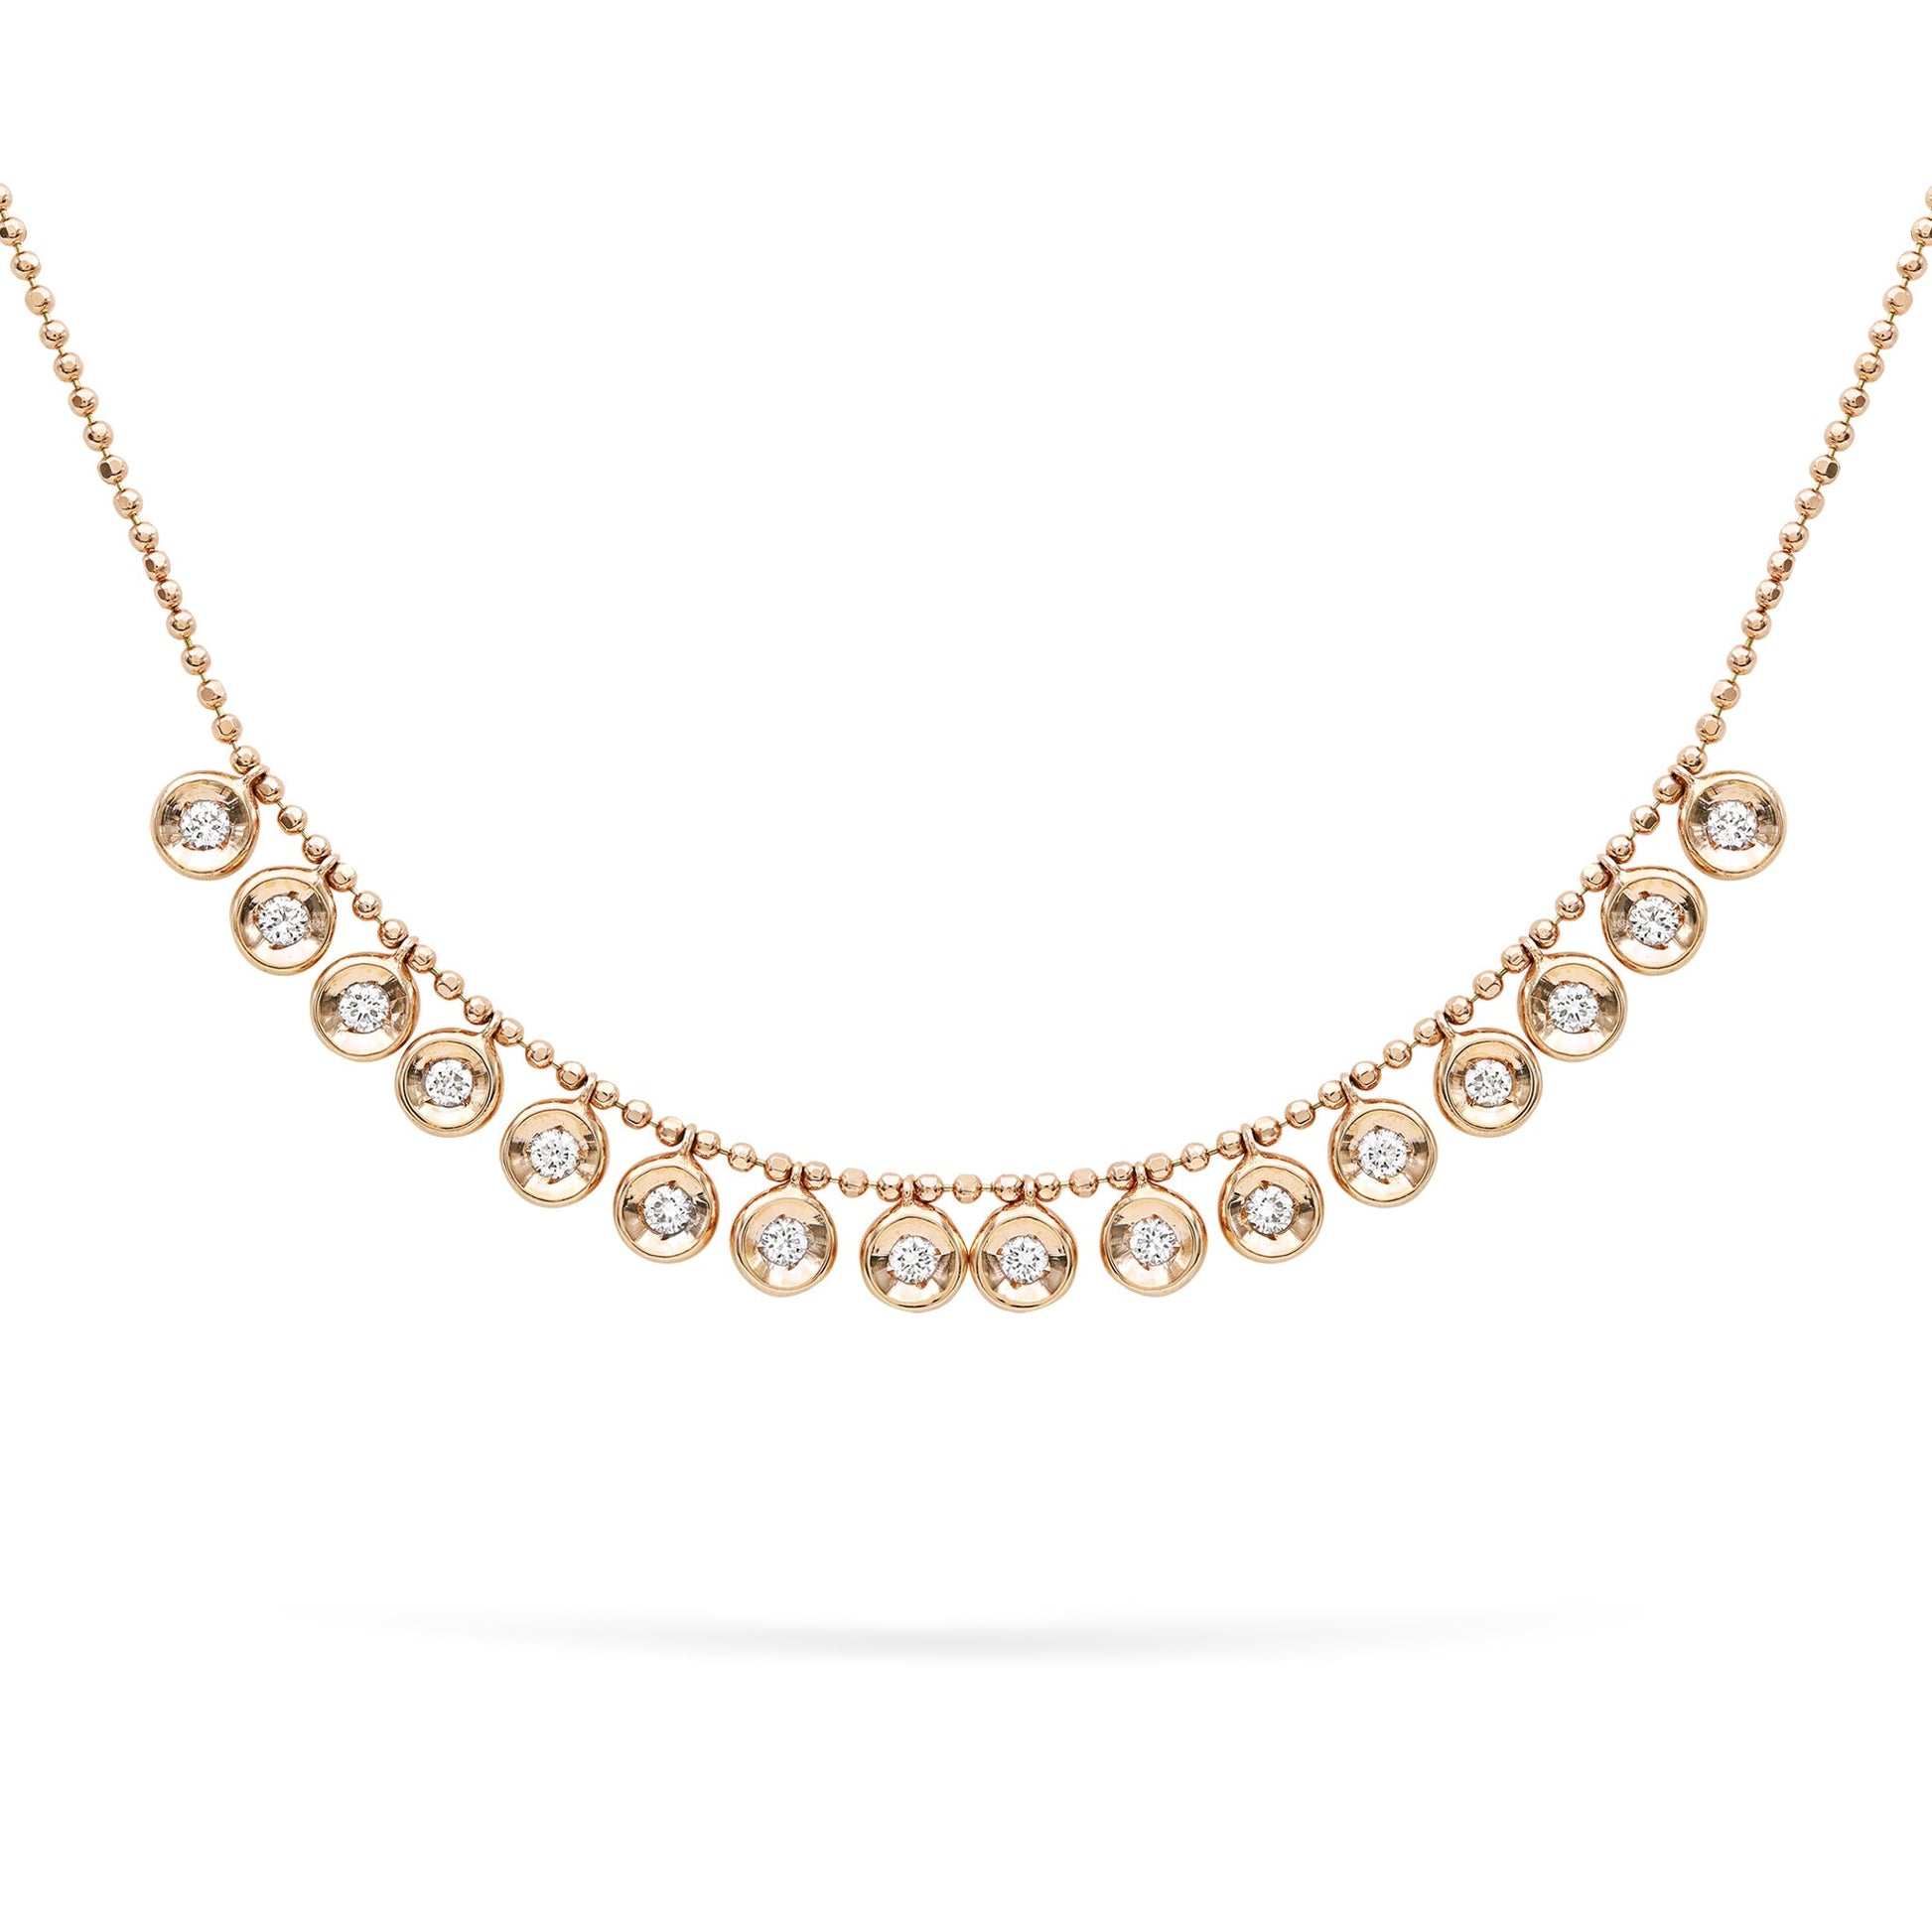 Jewelry Serenity | Diamond Necklace | 0.41 Cts. | 14K Gold - Yellow / 43 Cm / necklace Zengoda Shop online from